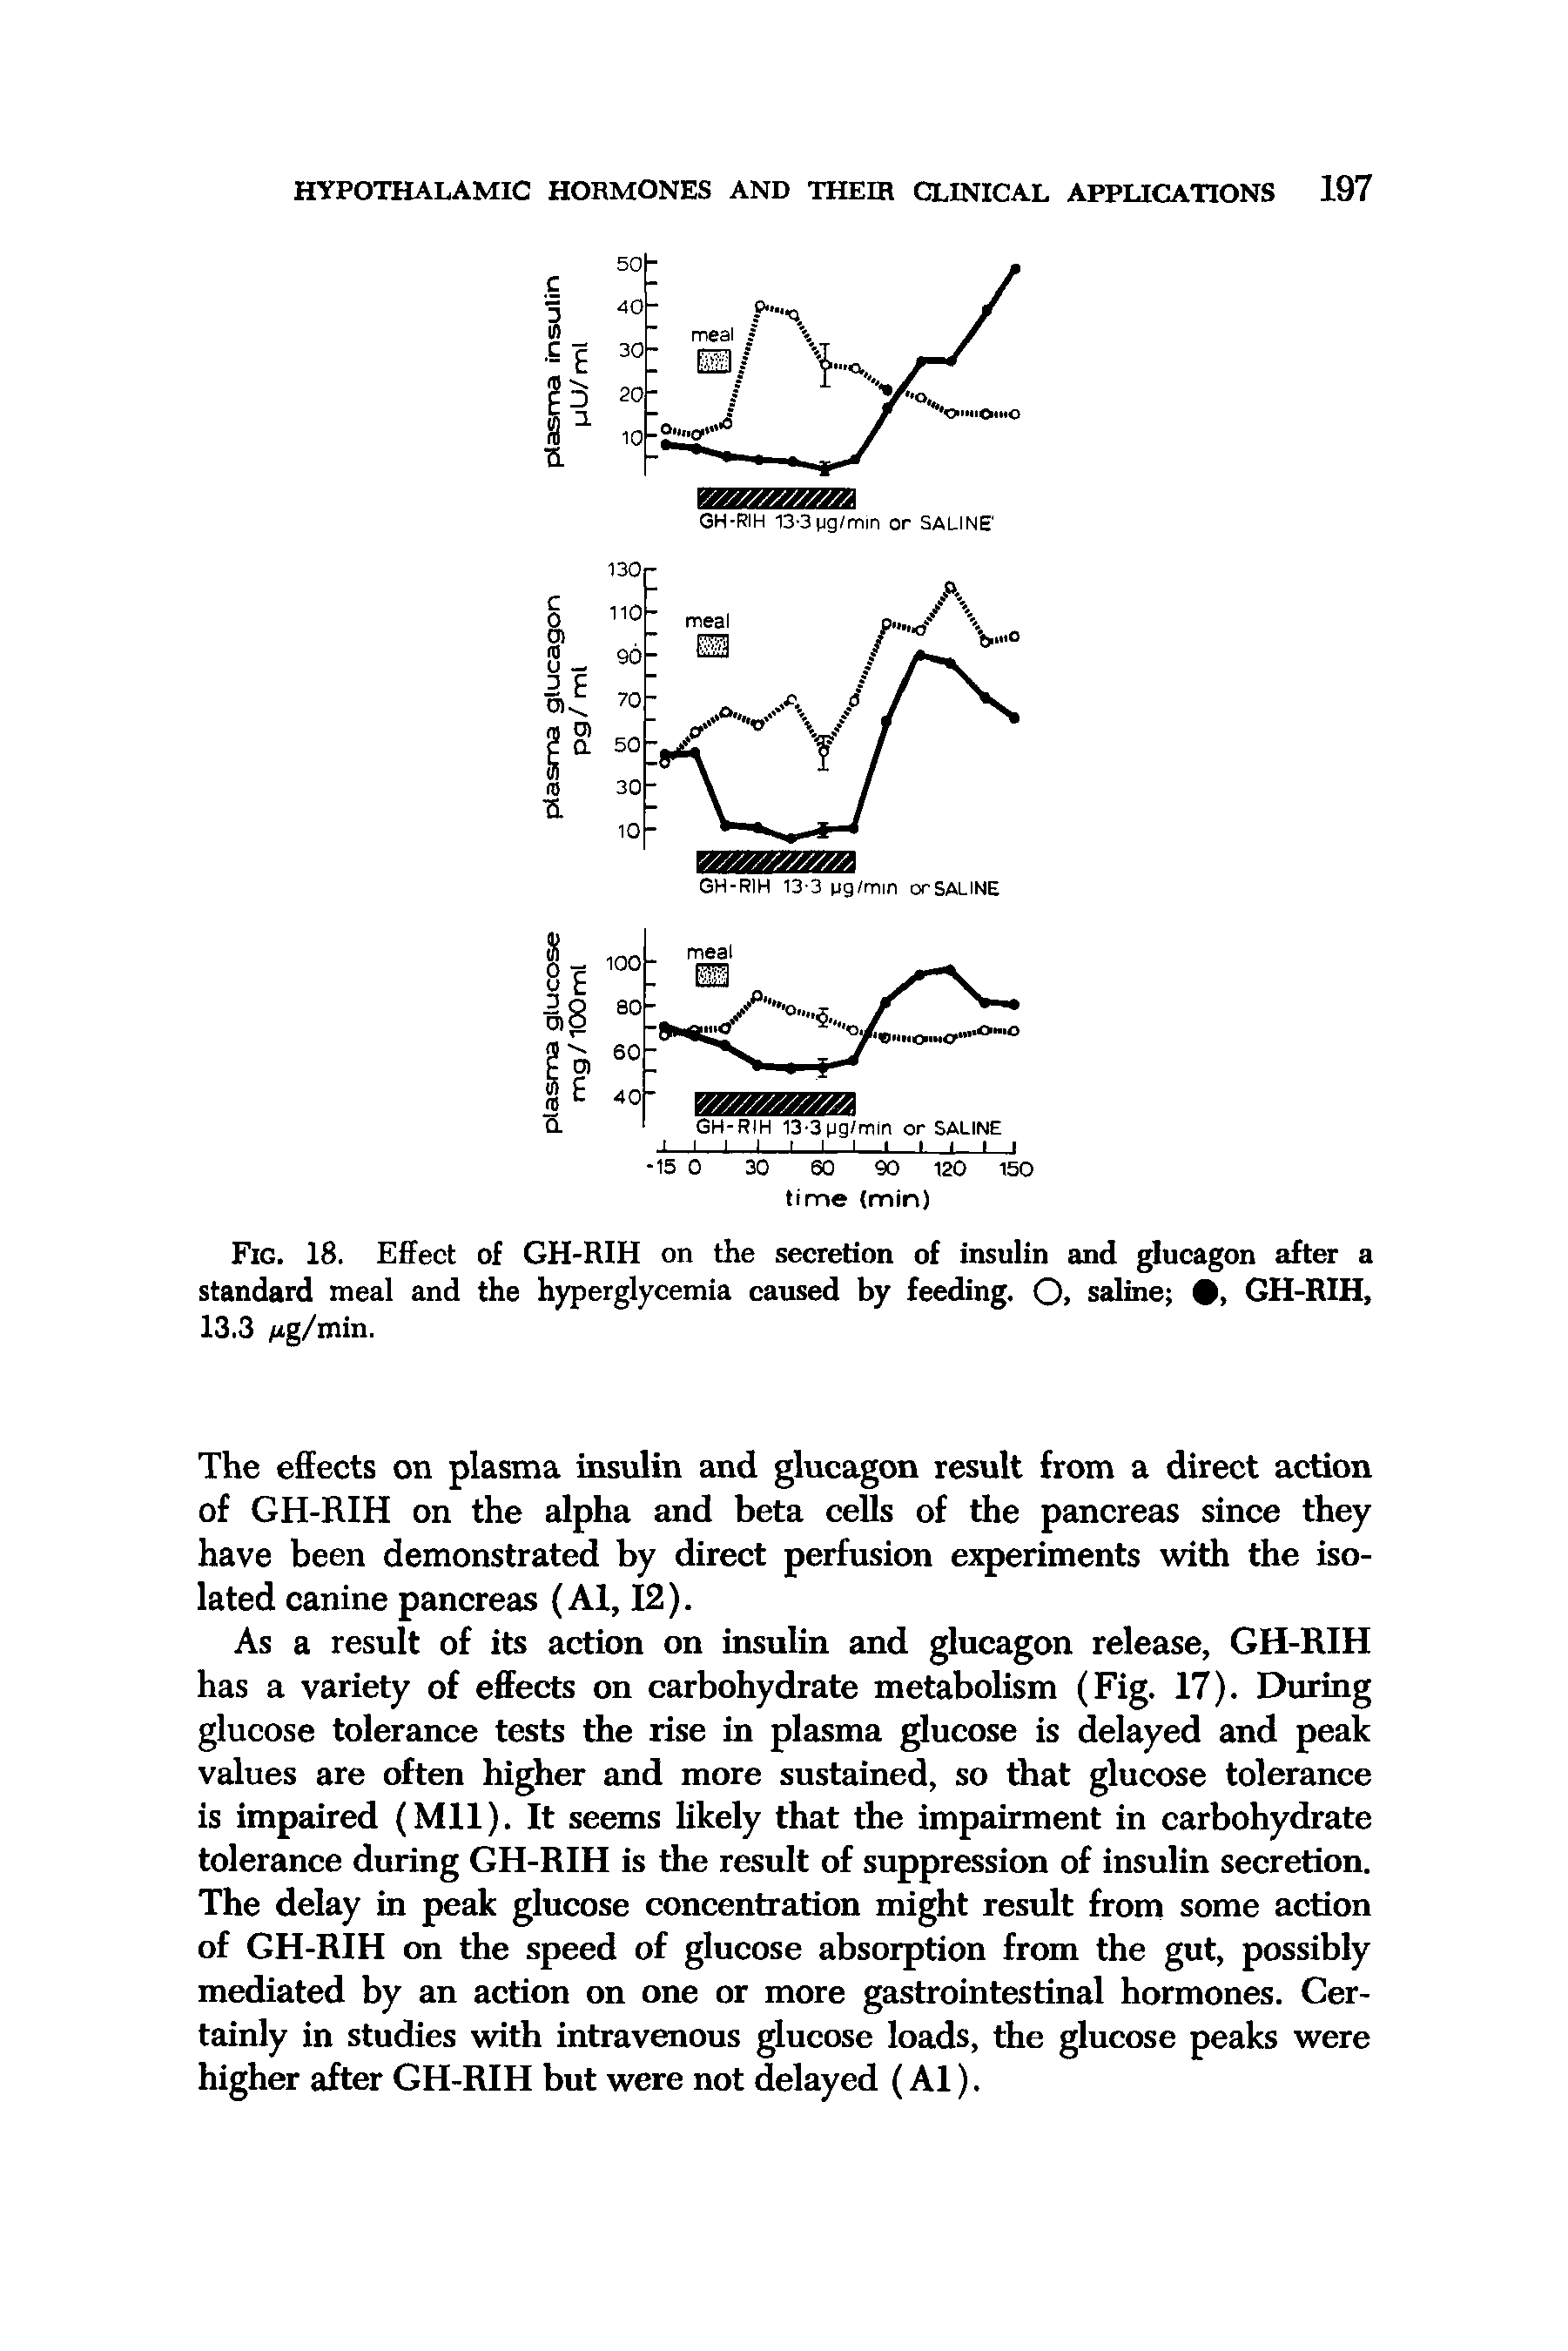 Fig. 18. Effect of GH-RIH on the secretion of insulin and ucagon after a standard meal and the hyperglycemia caused by feeding. 0> saline , GH-RIH, 13.3 /ig/min.